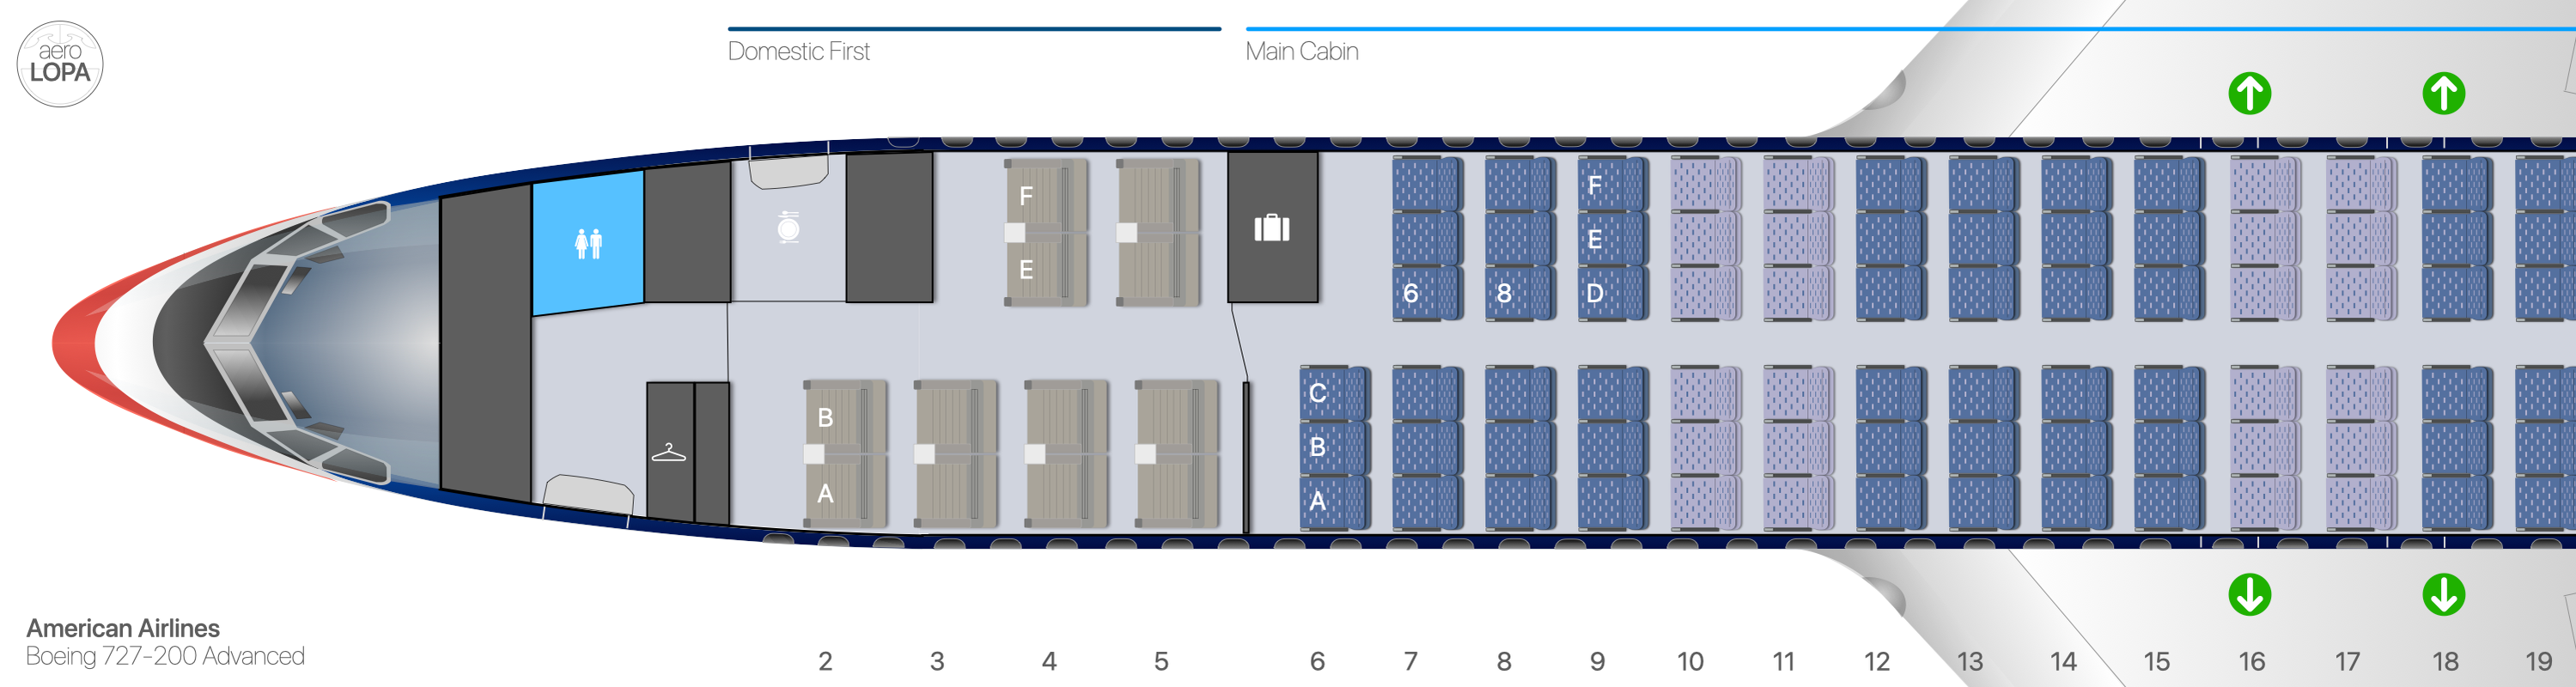 Detailed Aircraft Seat Plans